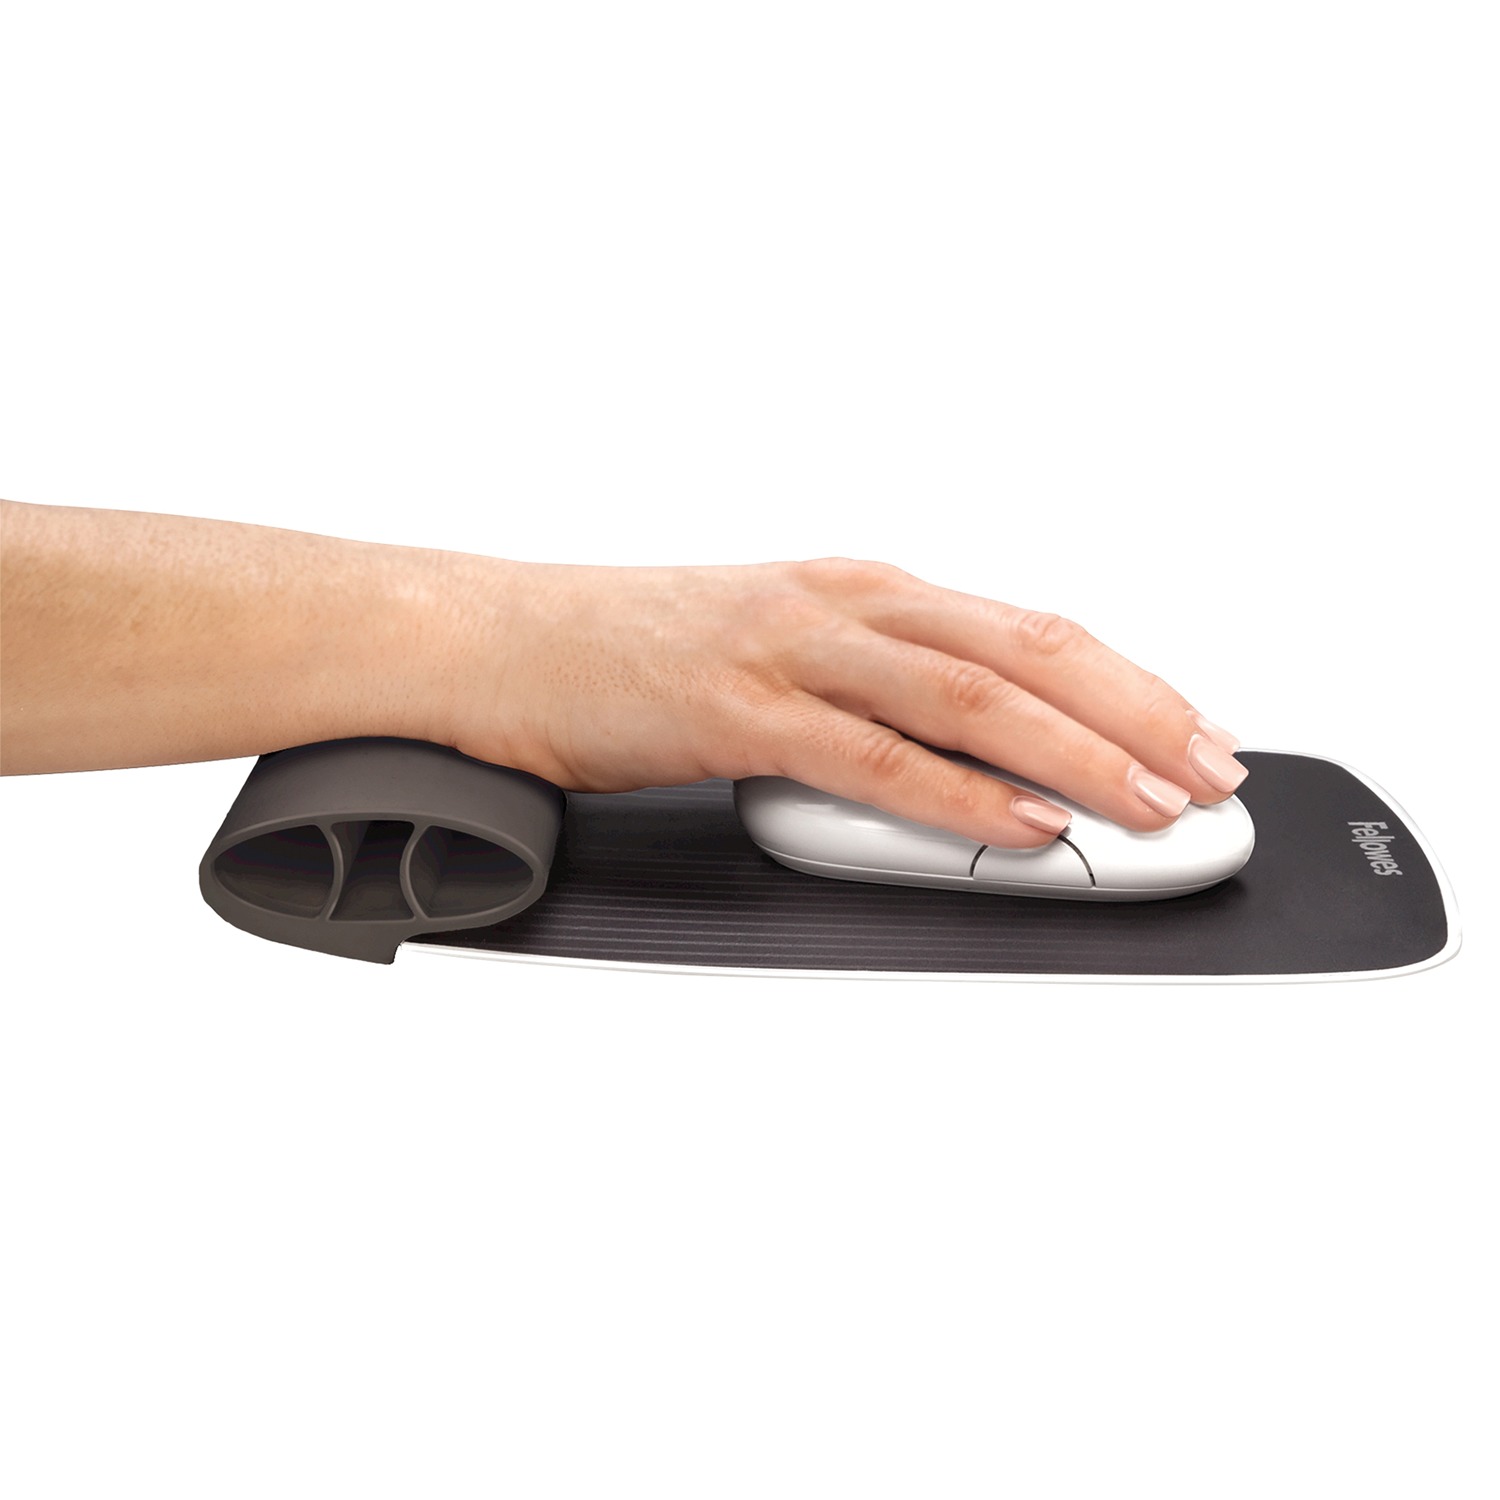 I-Spire Wrist Rocker Mouse Pad with Wrist Rest 7.81" x 10", Gray - image 5 of 5